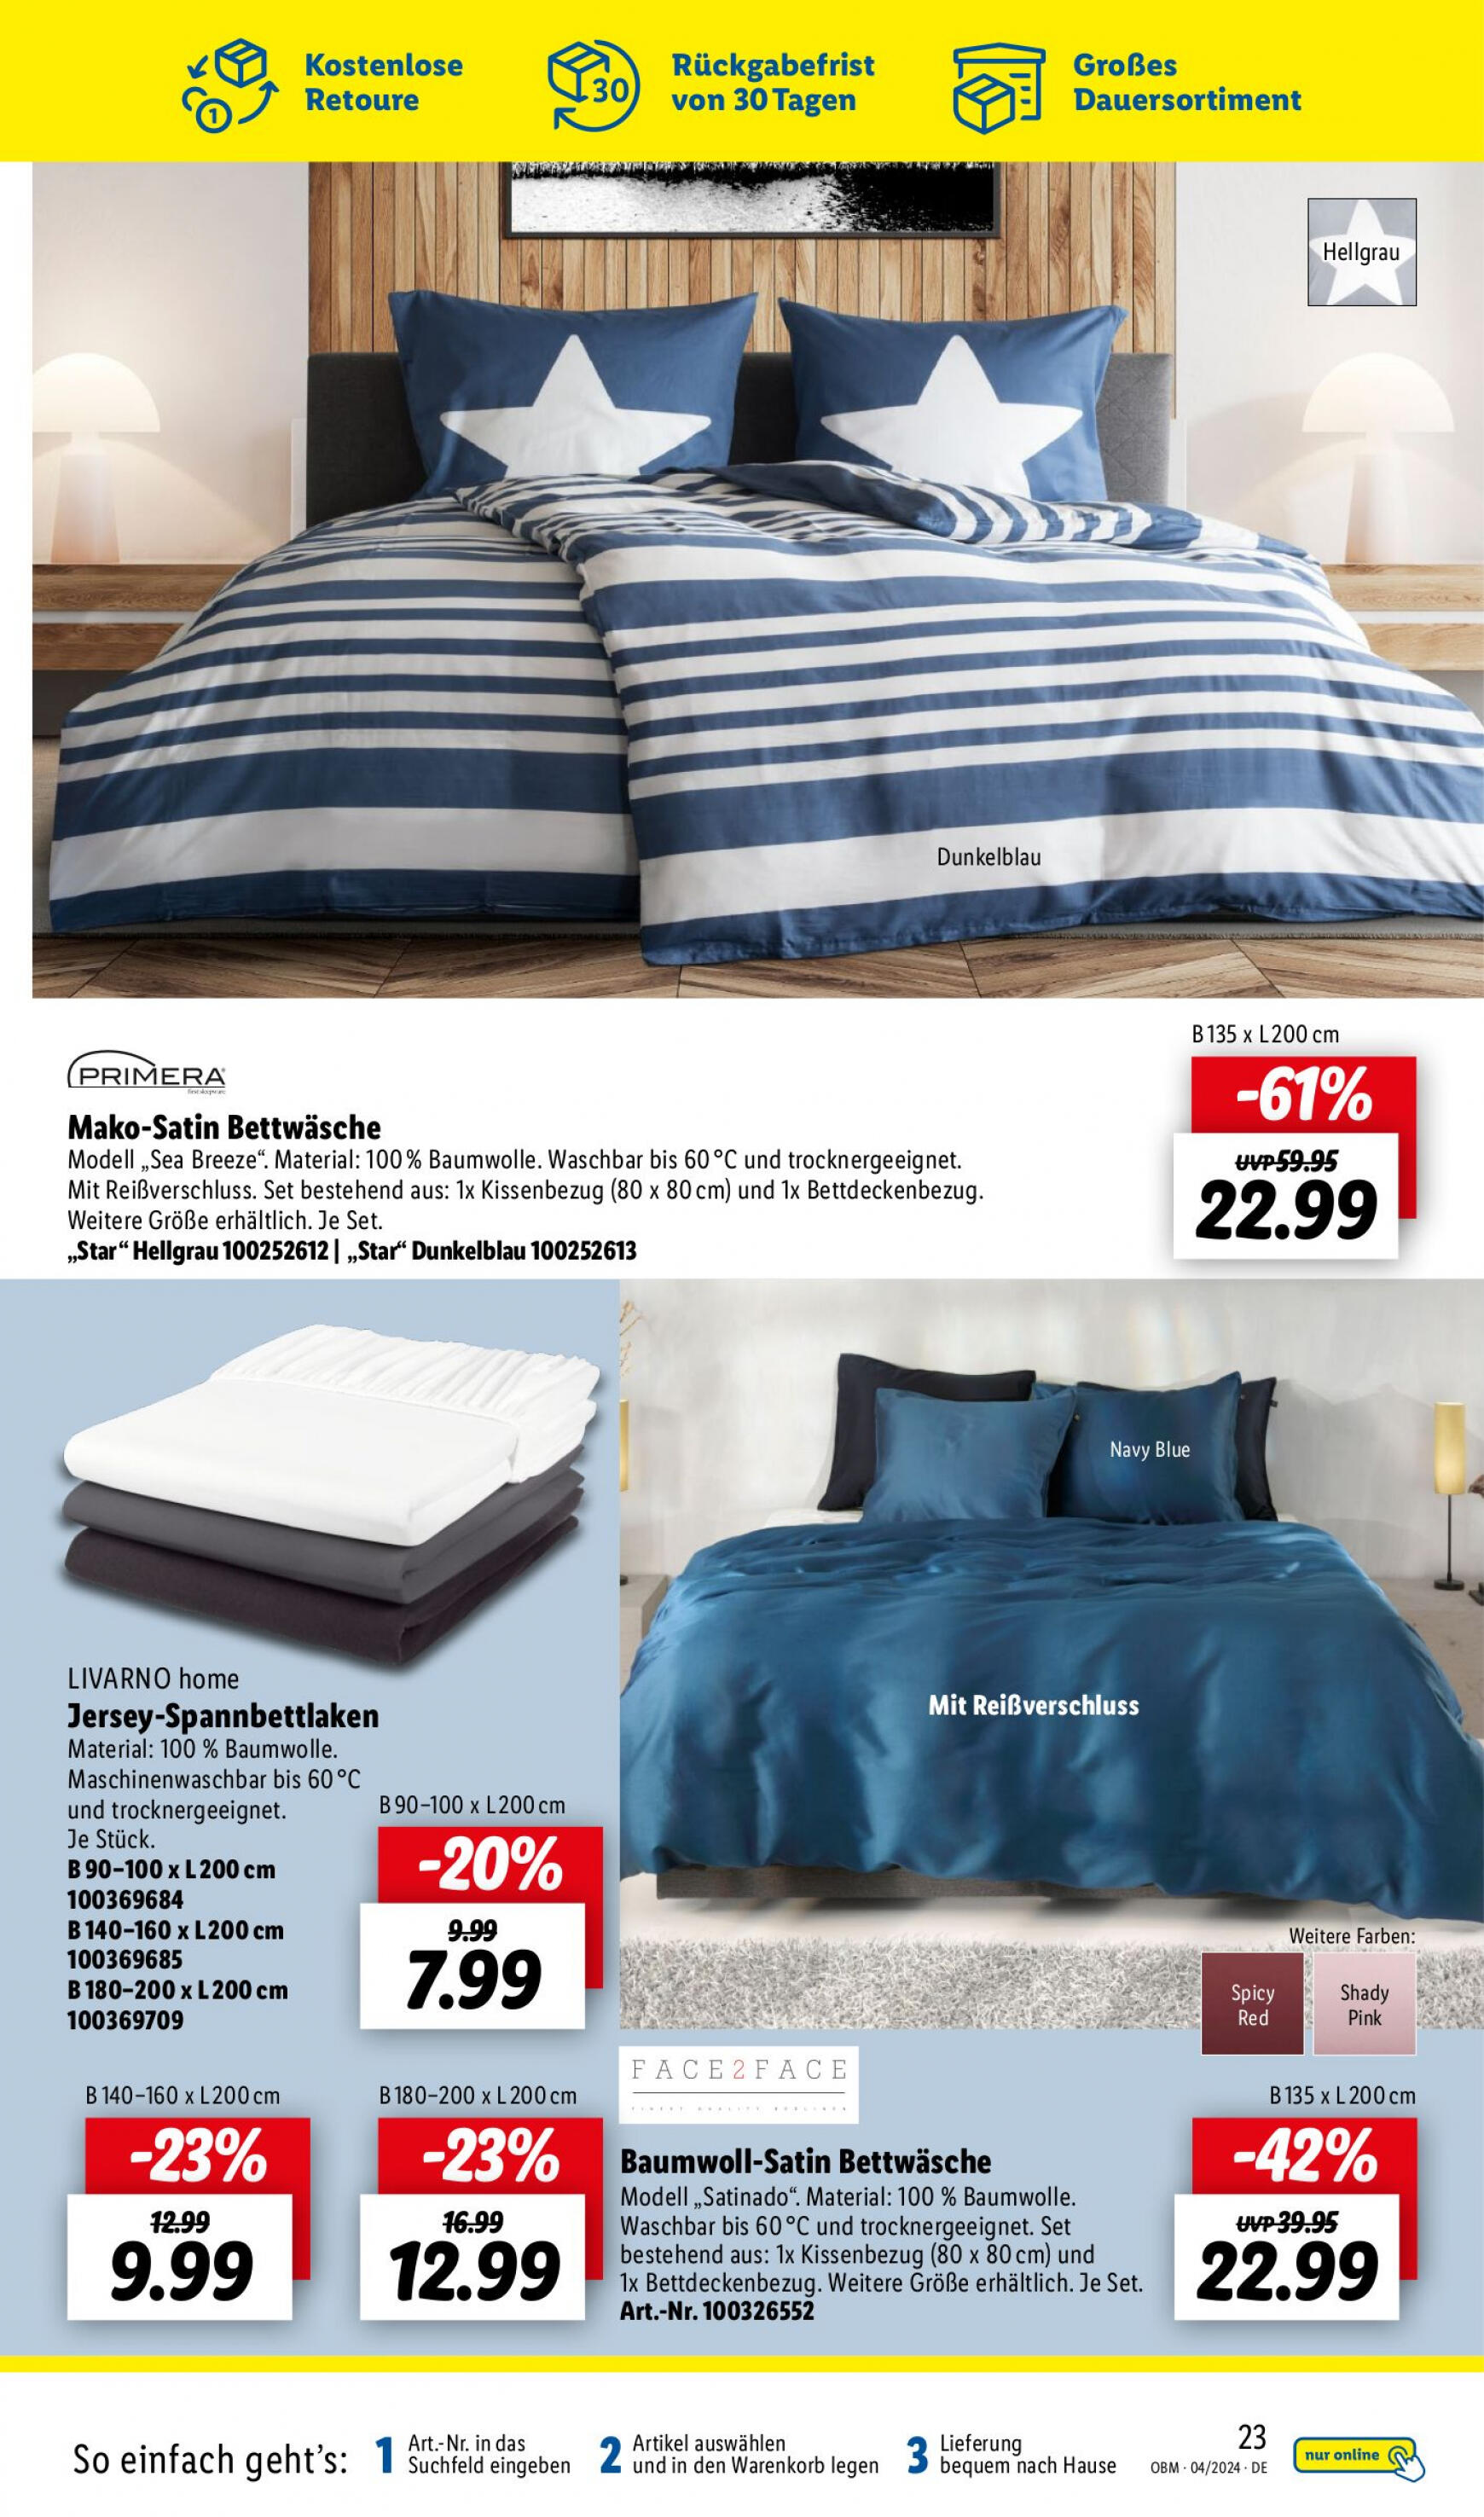 lidl - Flyer Lidl - Aktuelle Onlineshop-Highlights aktuell 01.04. - 30.04. - page: 23